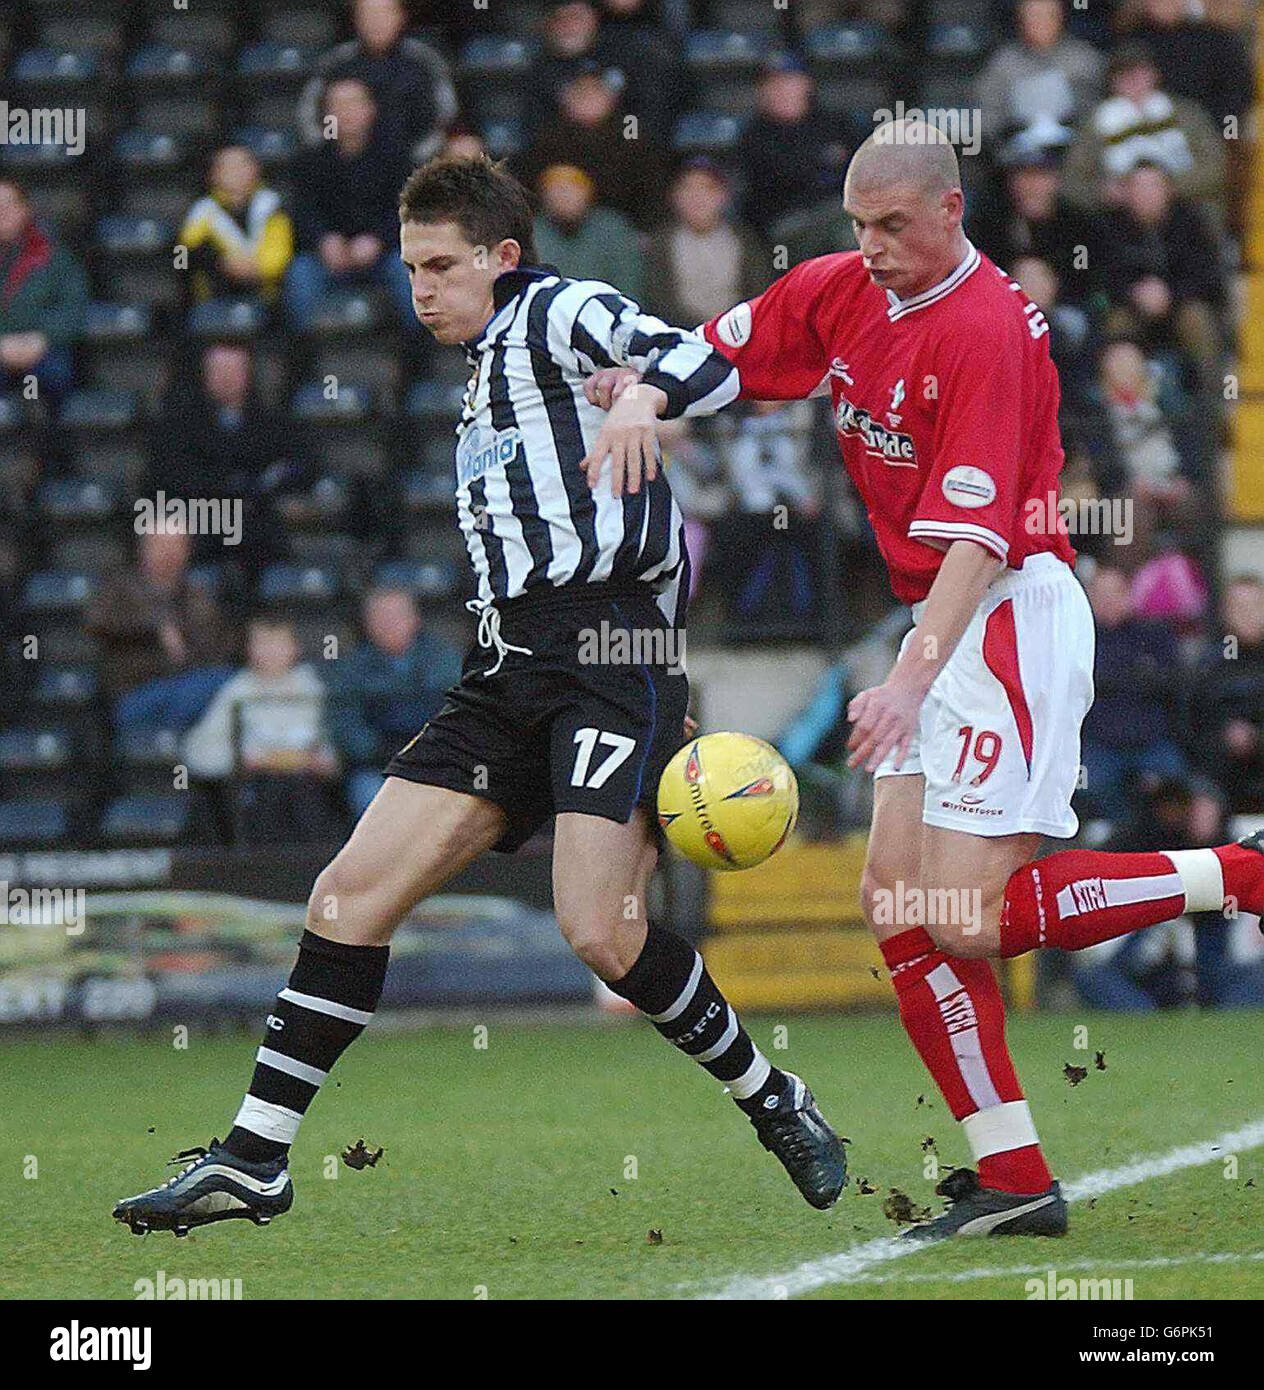 Notts County's Tony Hackworth (left) defends against Swindon's Matthew Haywood during the Nationwide Division Two match at the County Ground, Nottingham. NO UNOFFICIAL CLUB WEBSITE USE. Stock Photo